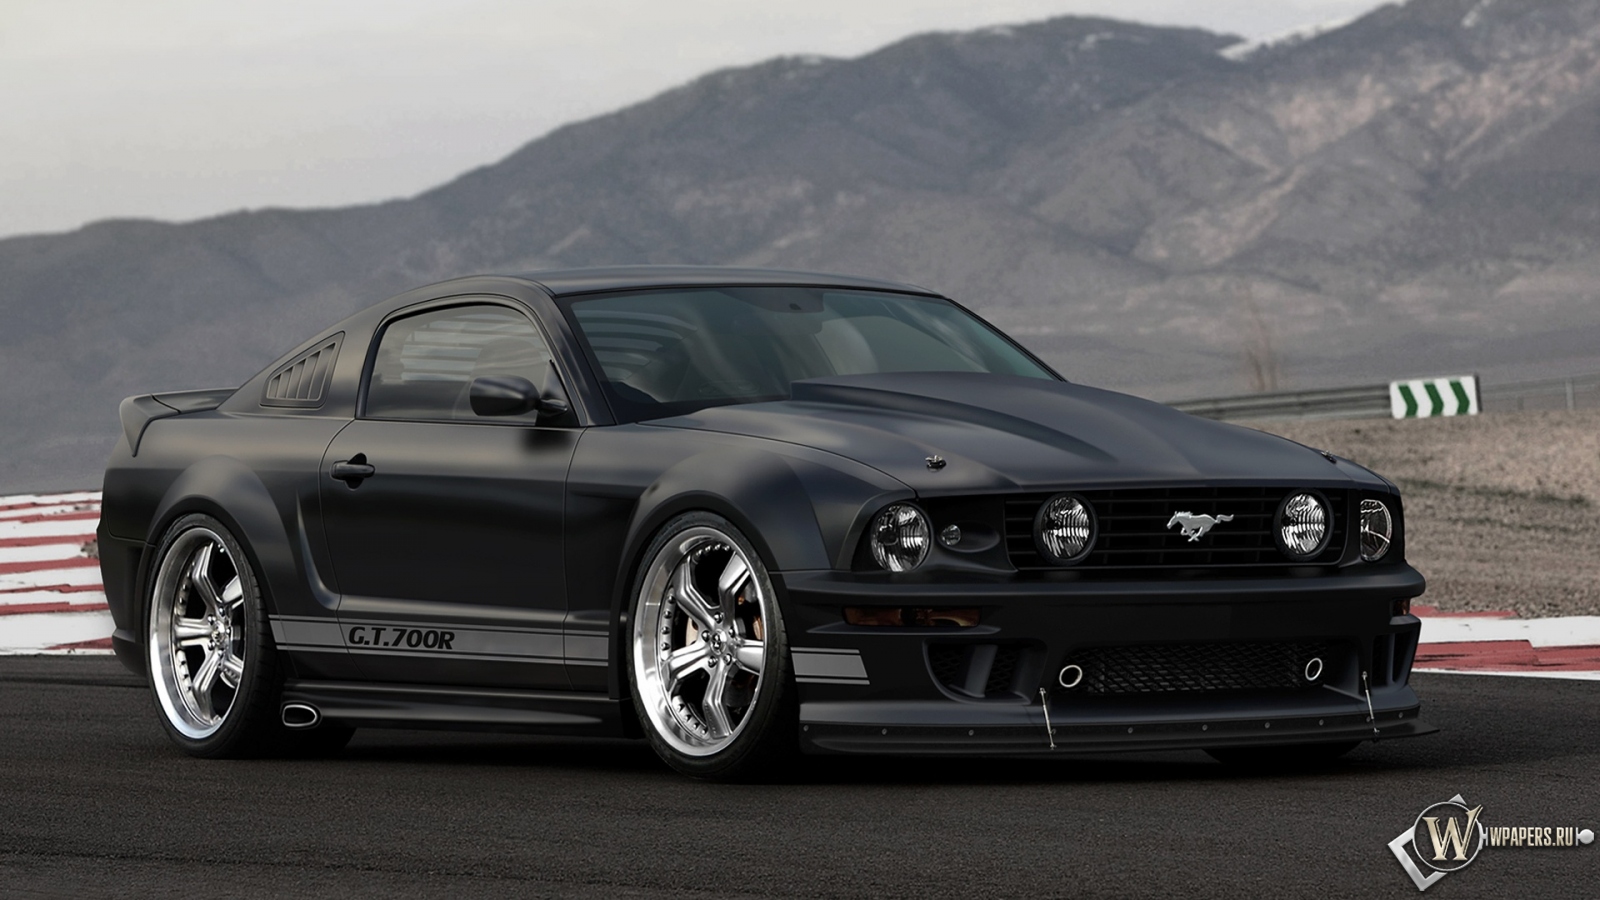 FORD MUSTANG GT 700 1600x900